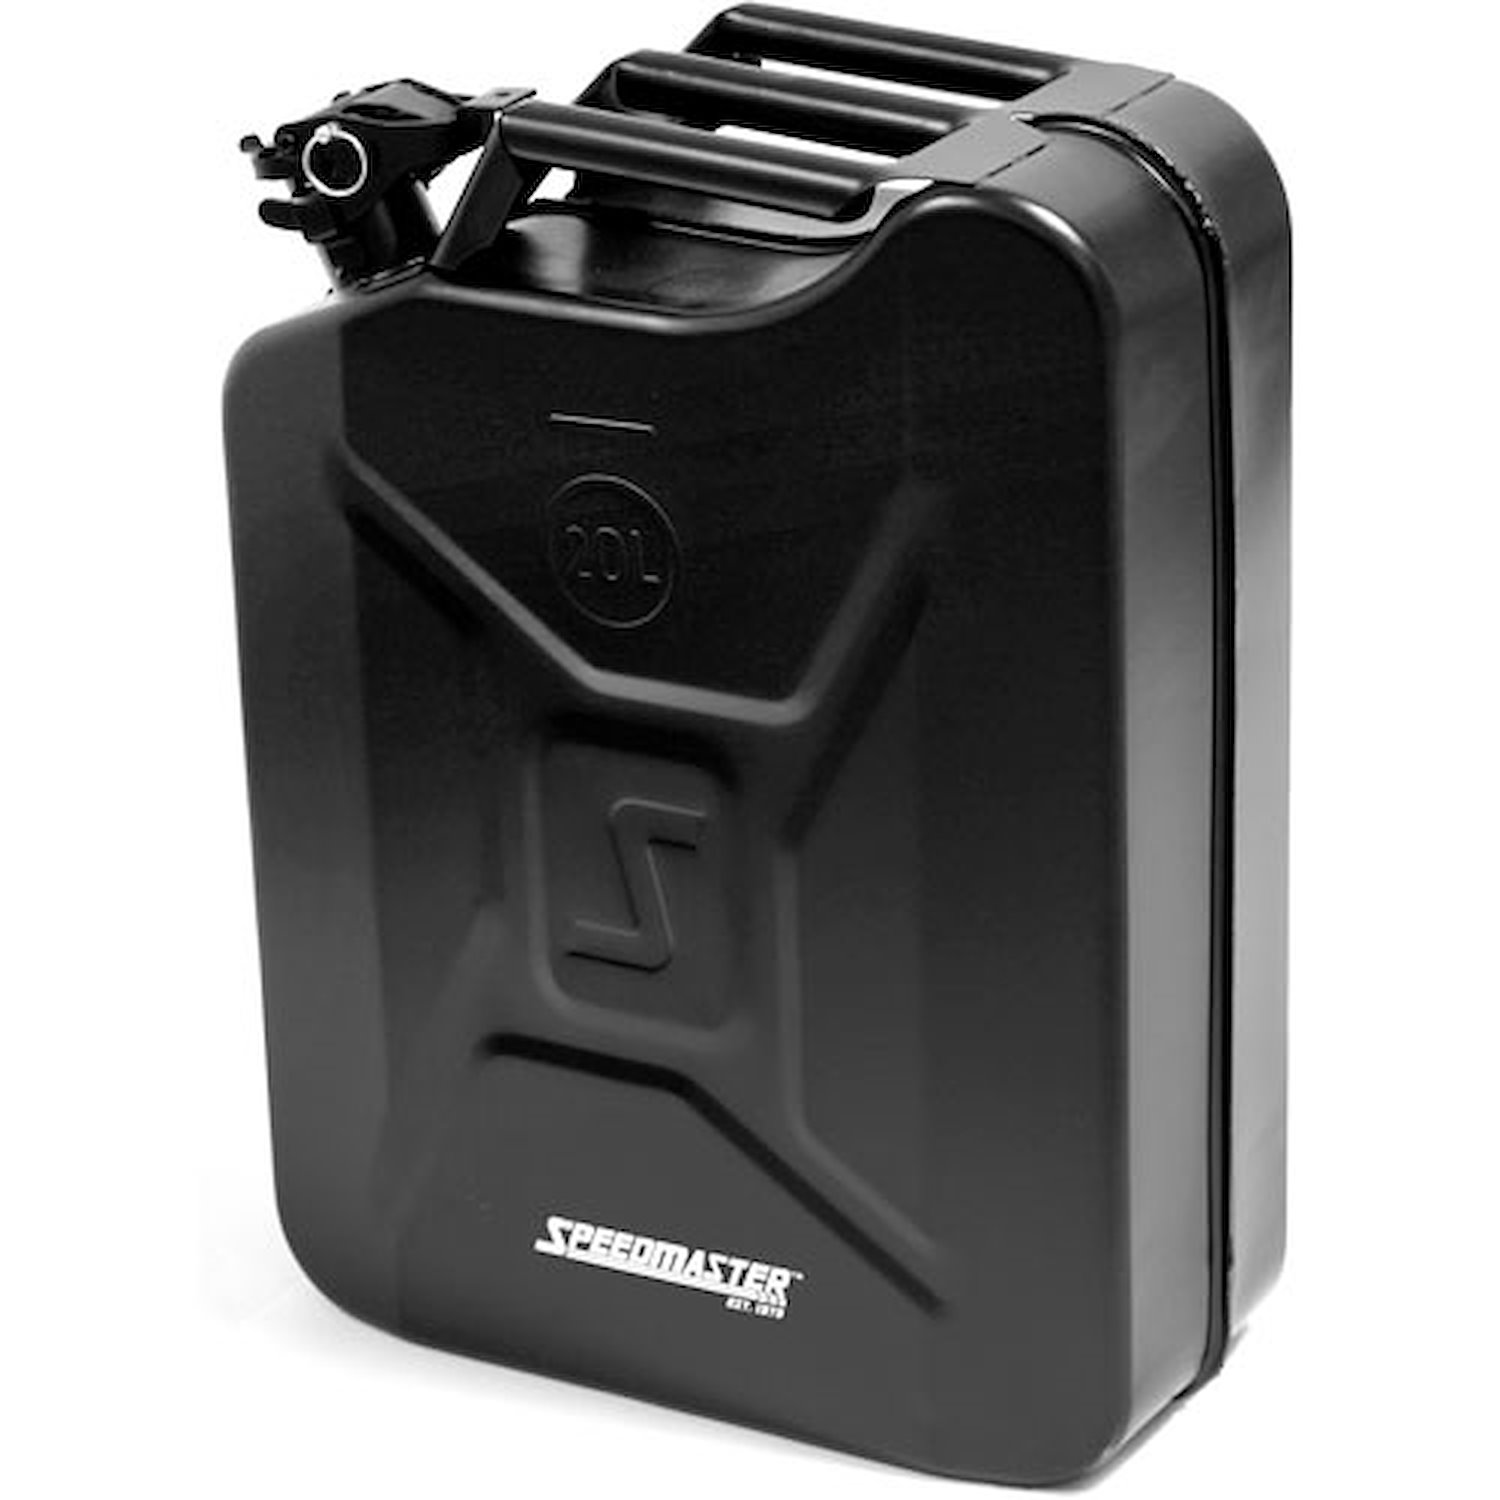 Steel Fuel Storage Jerry Can 5.2 Gallons